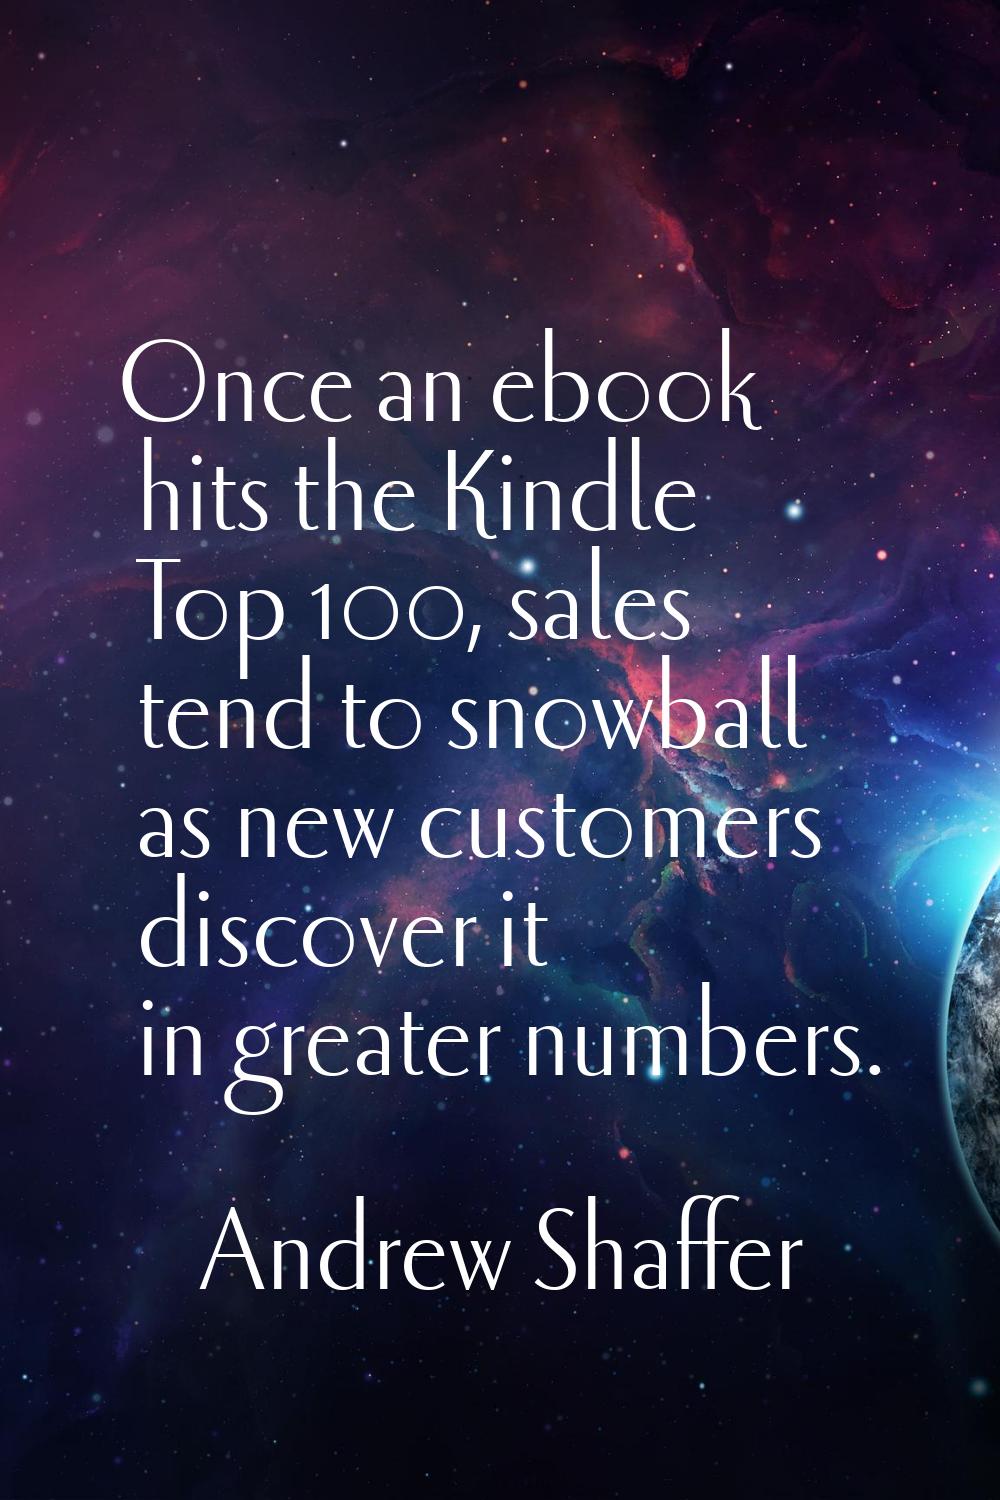 Once an ebook hits the Kindle Top 100, sales tend to snowball as new customers discover it in great